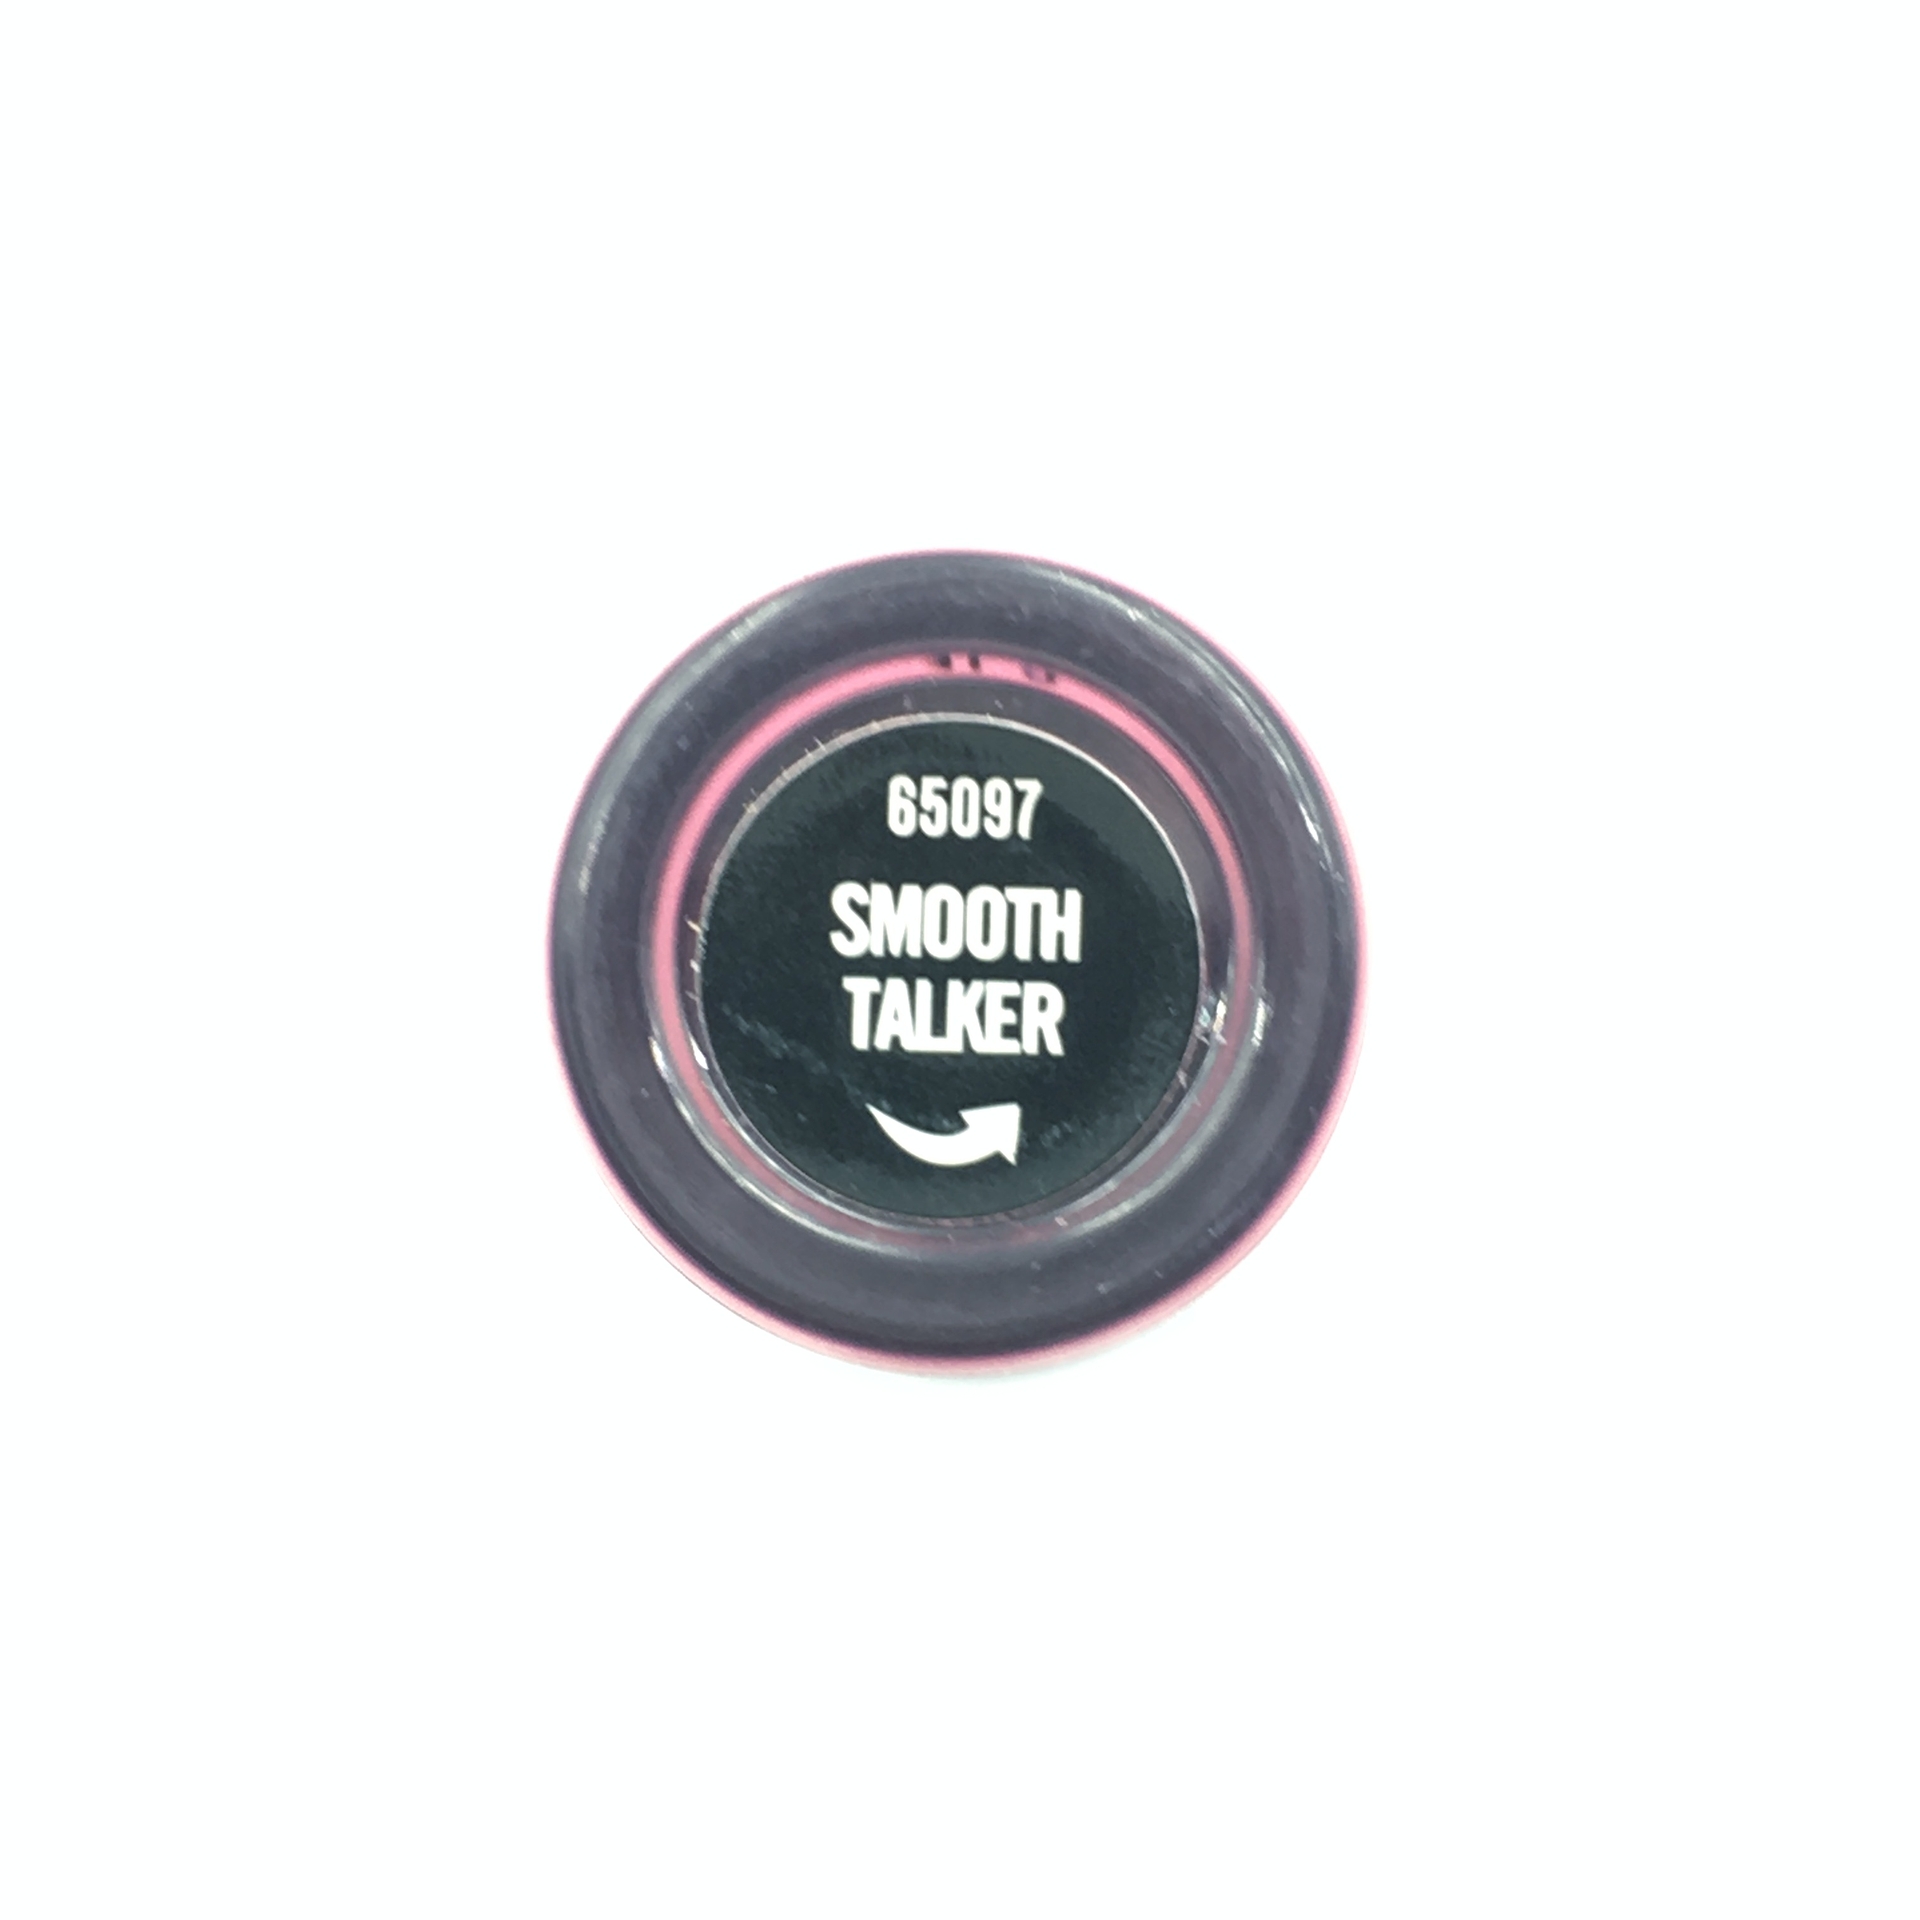 Bare Minerals Smooth Talker Lips